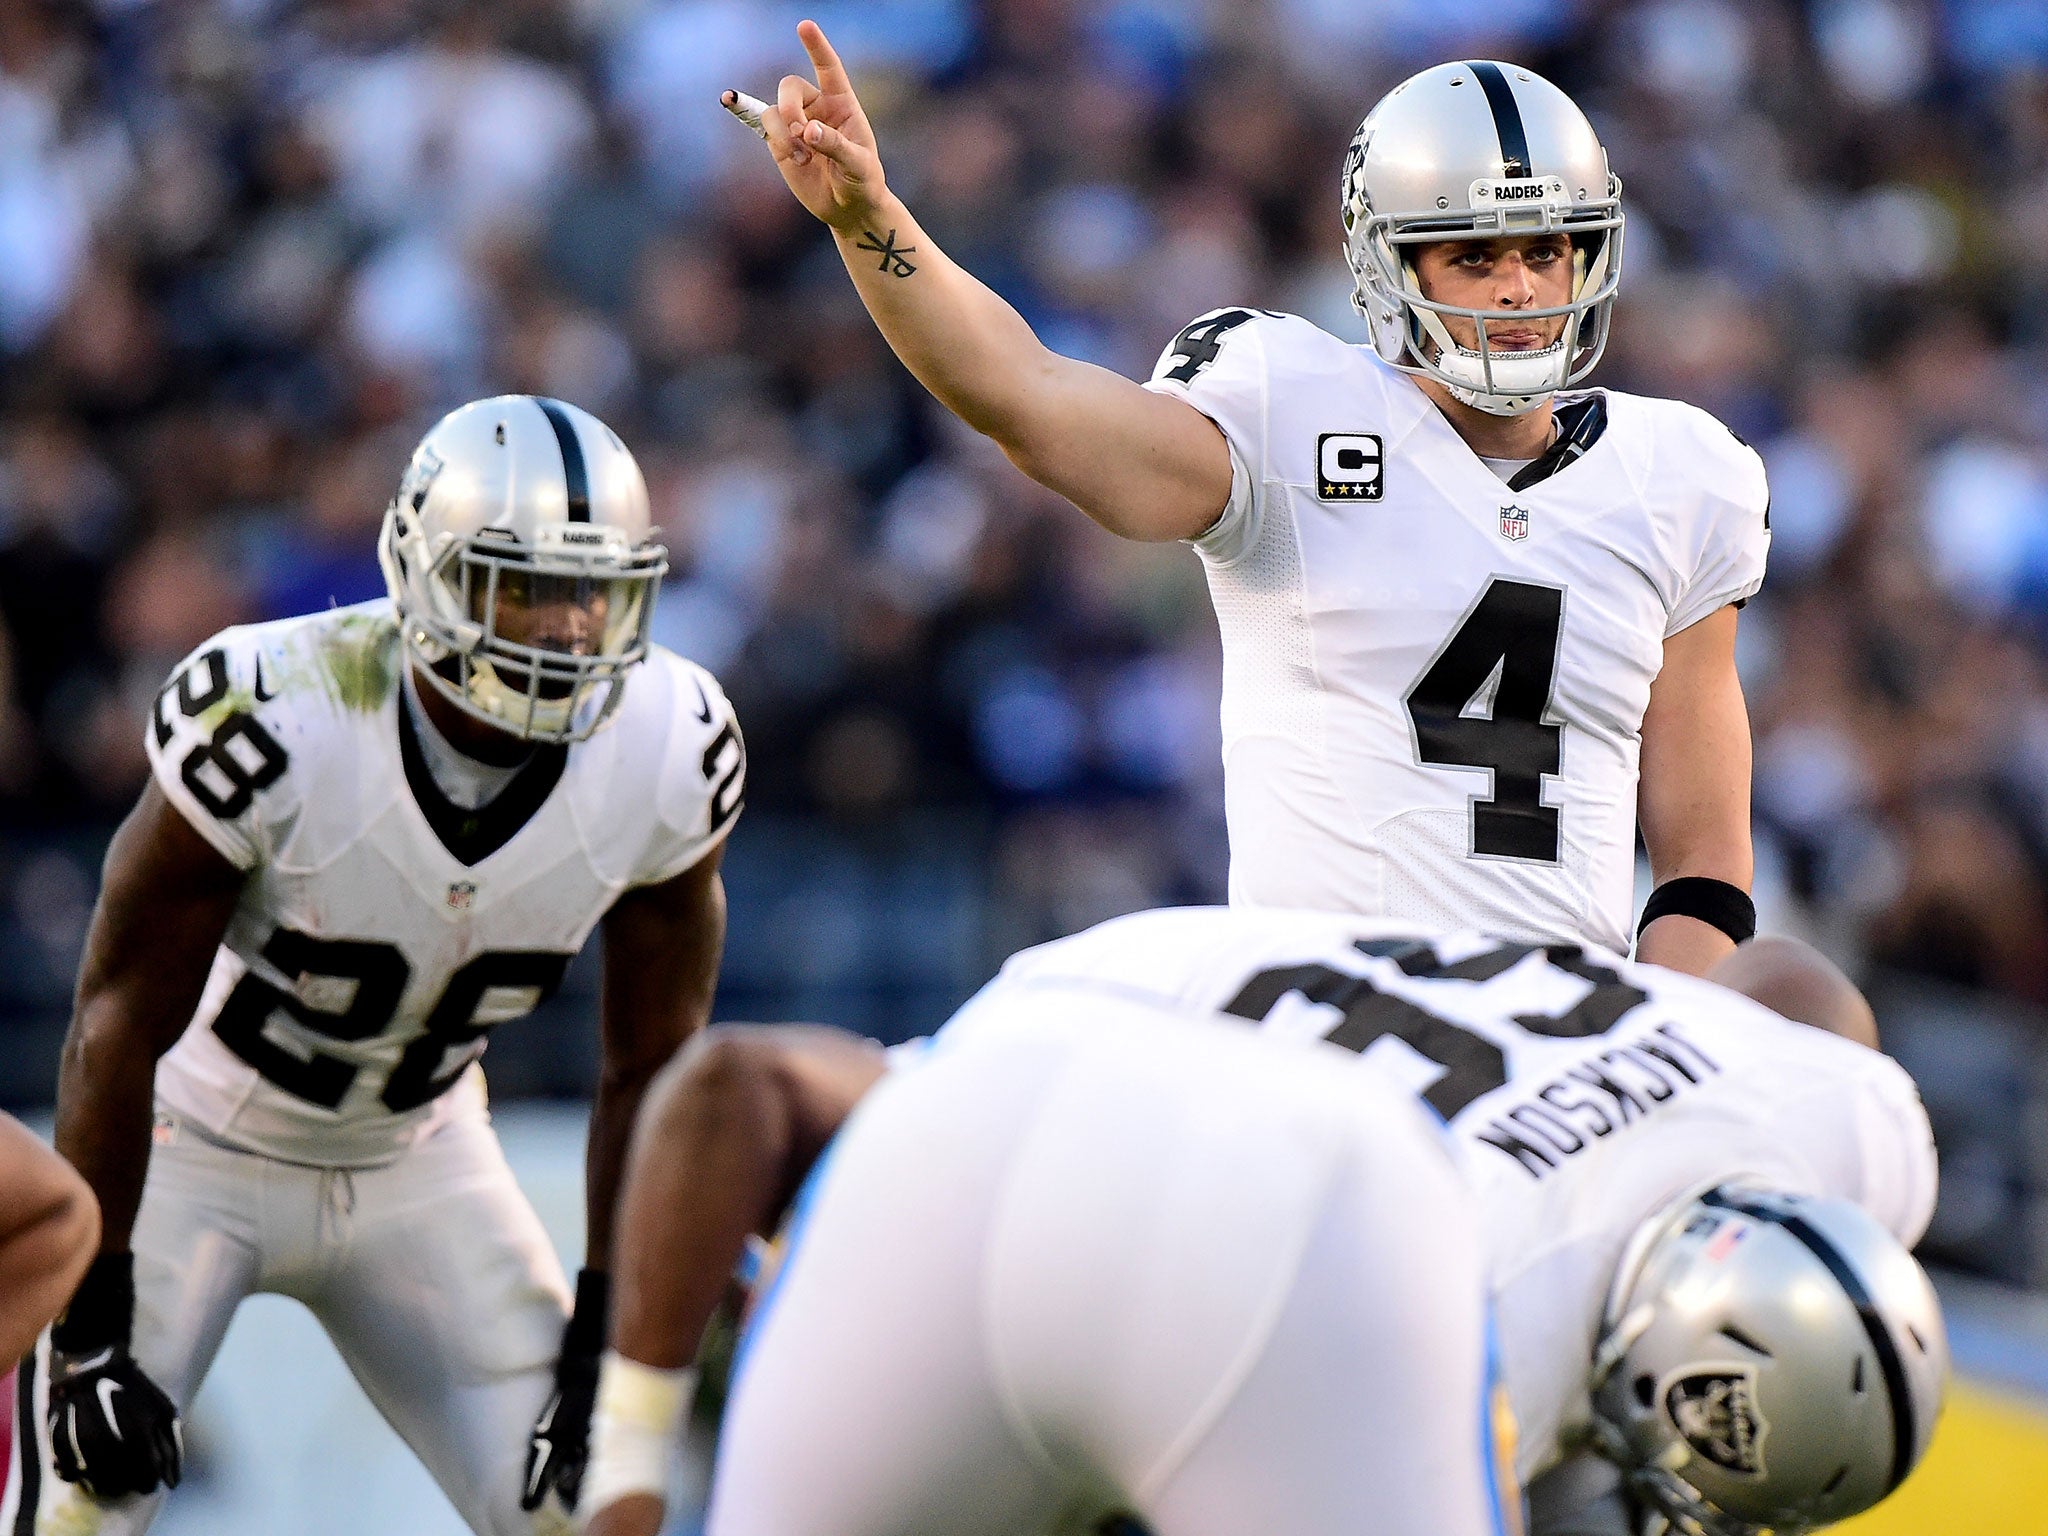 Quarterback Derek Carr and his team are on the move